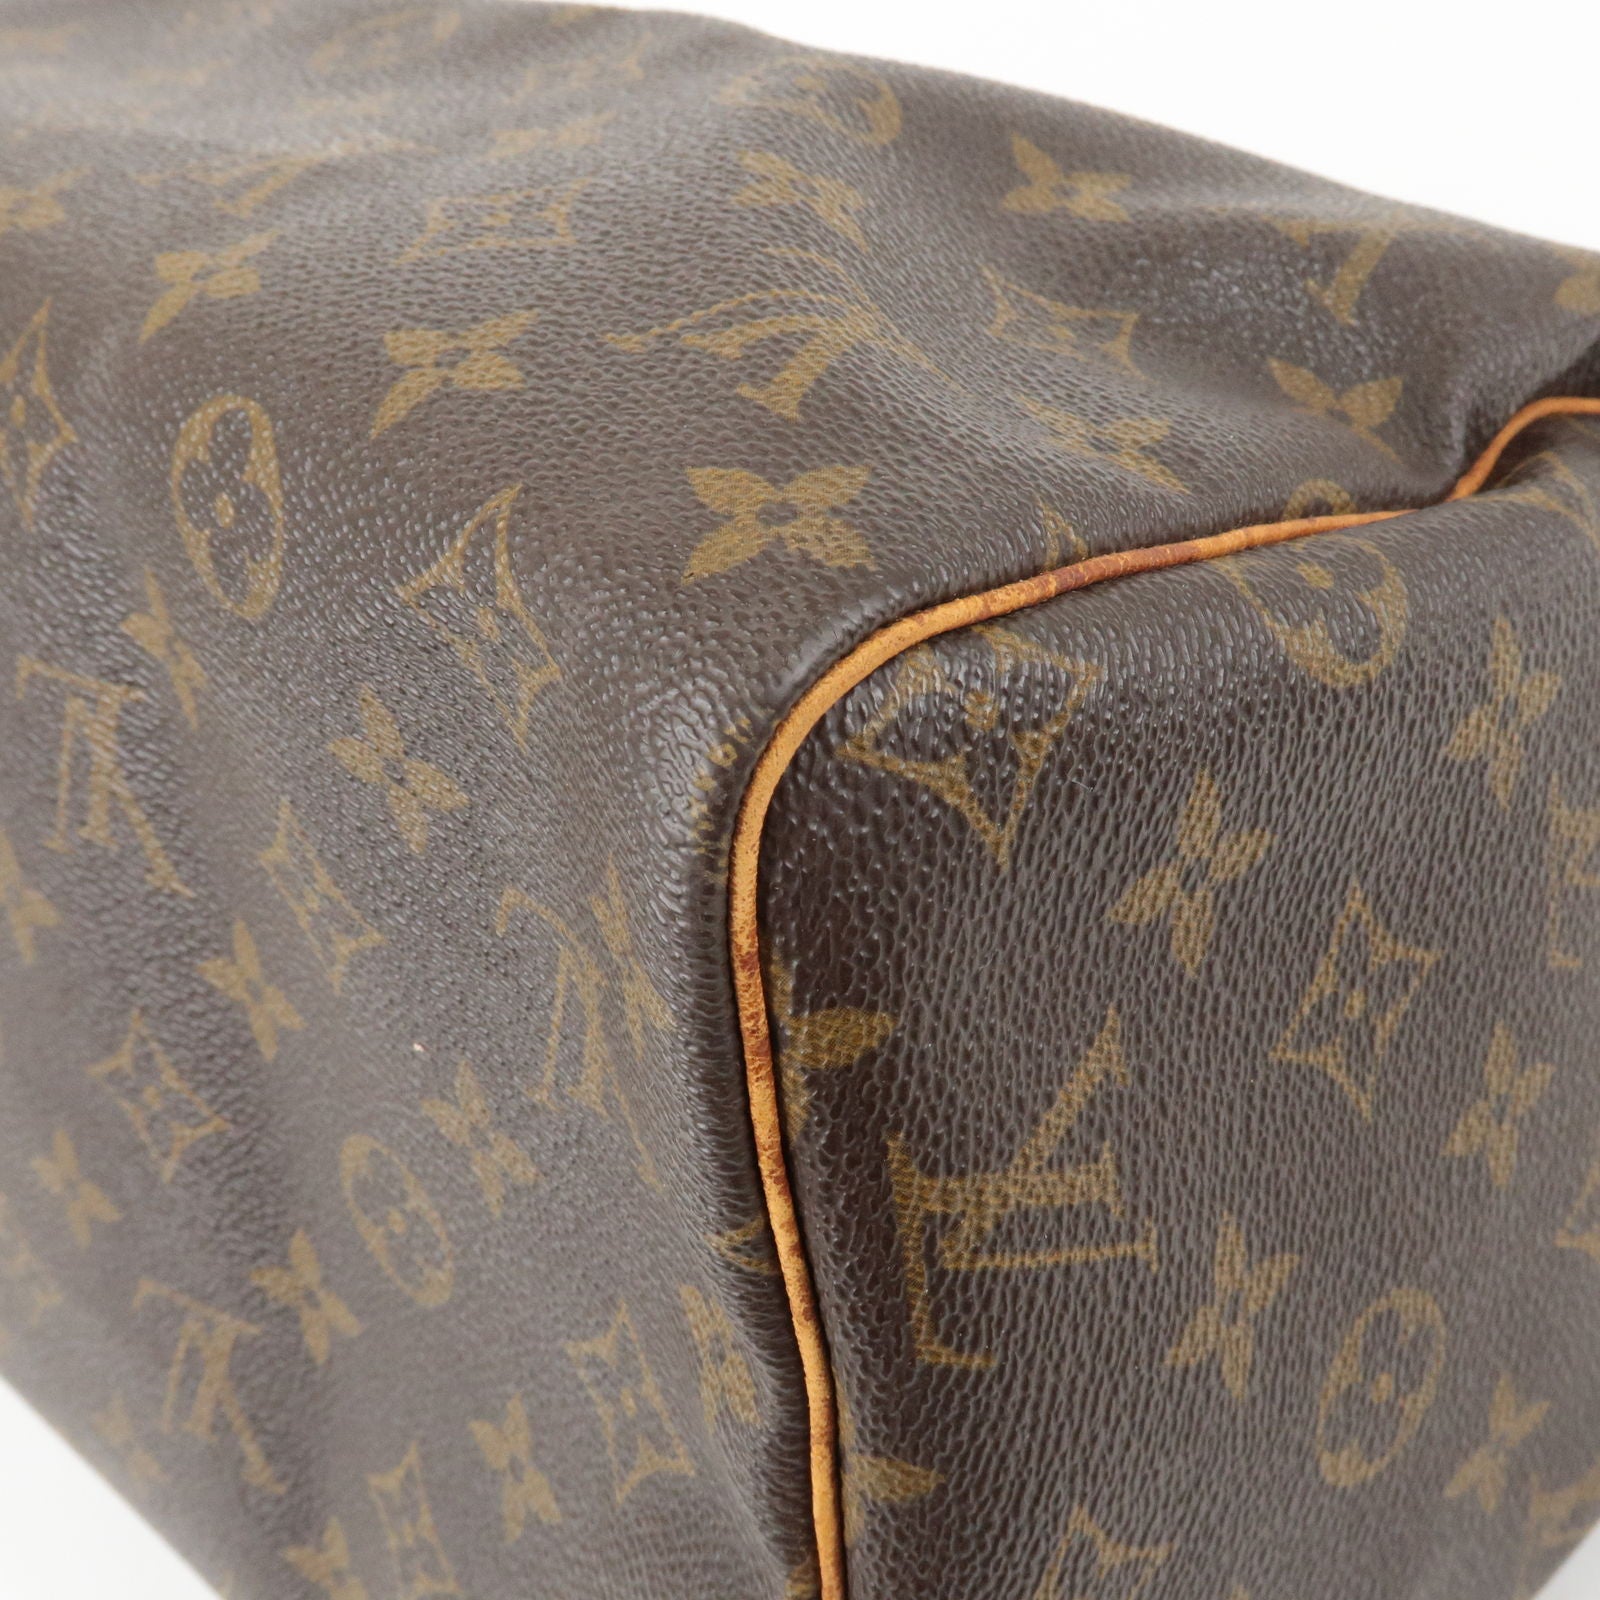 Louis Vuitton 2011 Pre-owned Neverfull MM Tote Bag